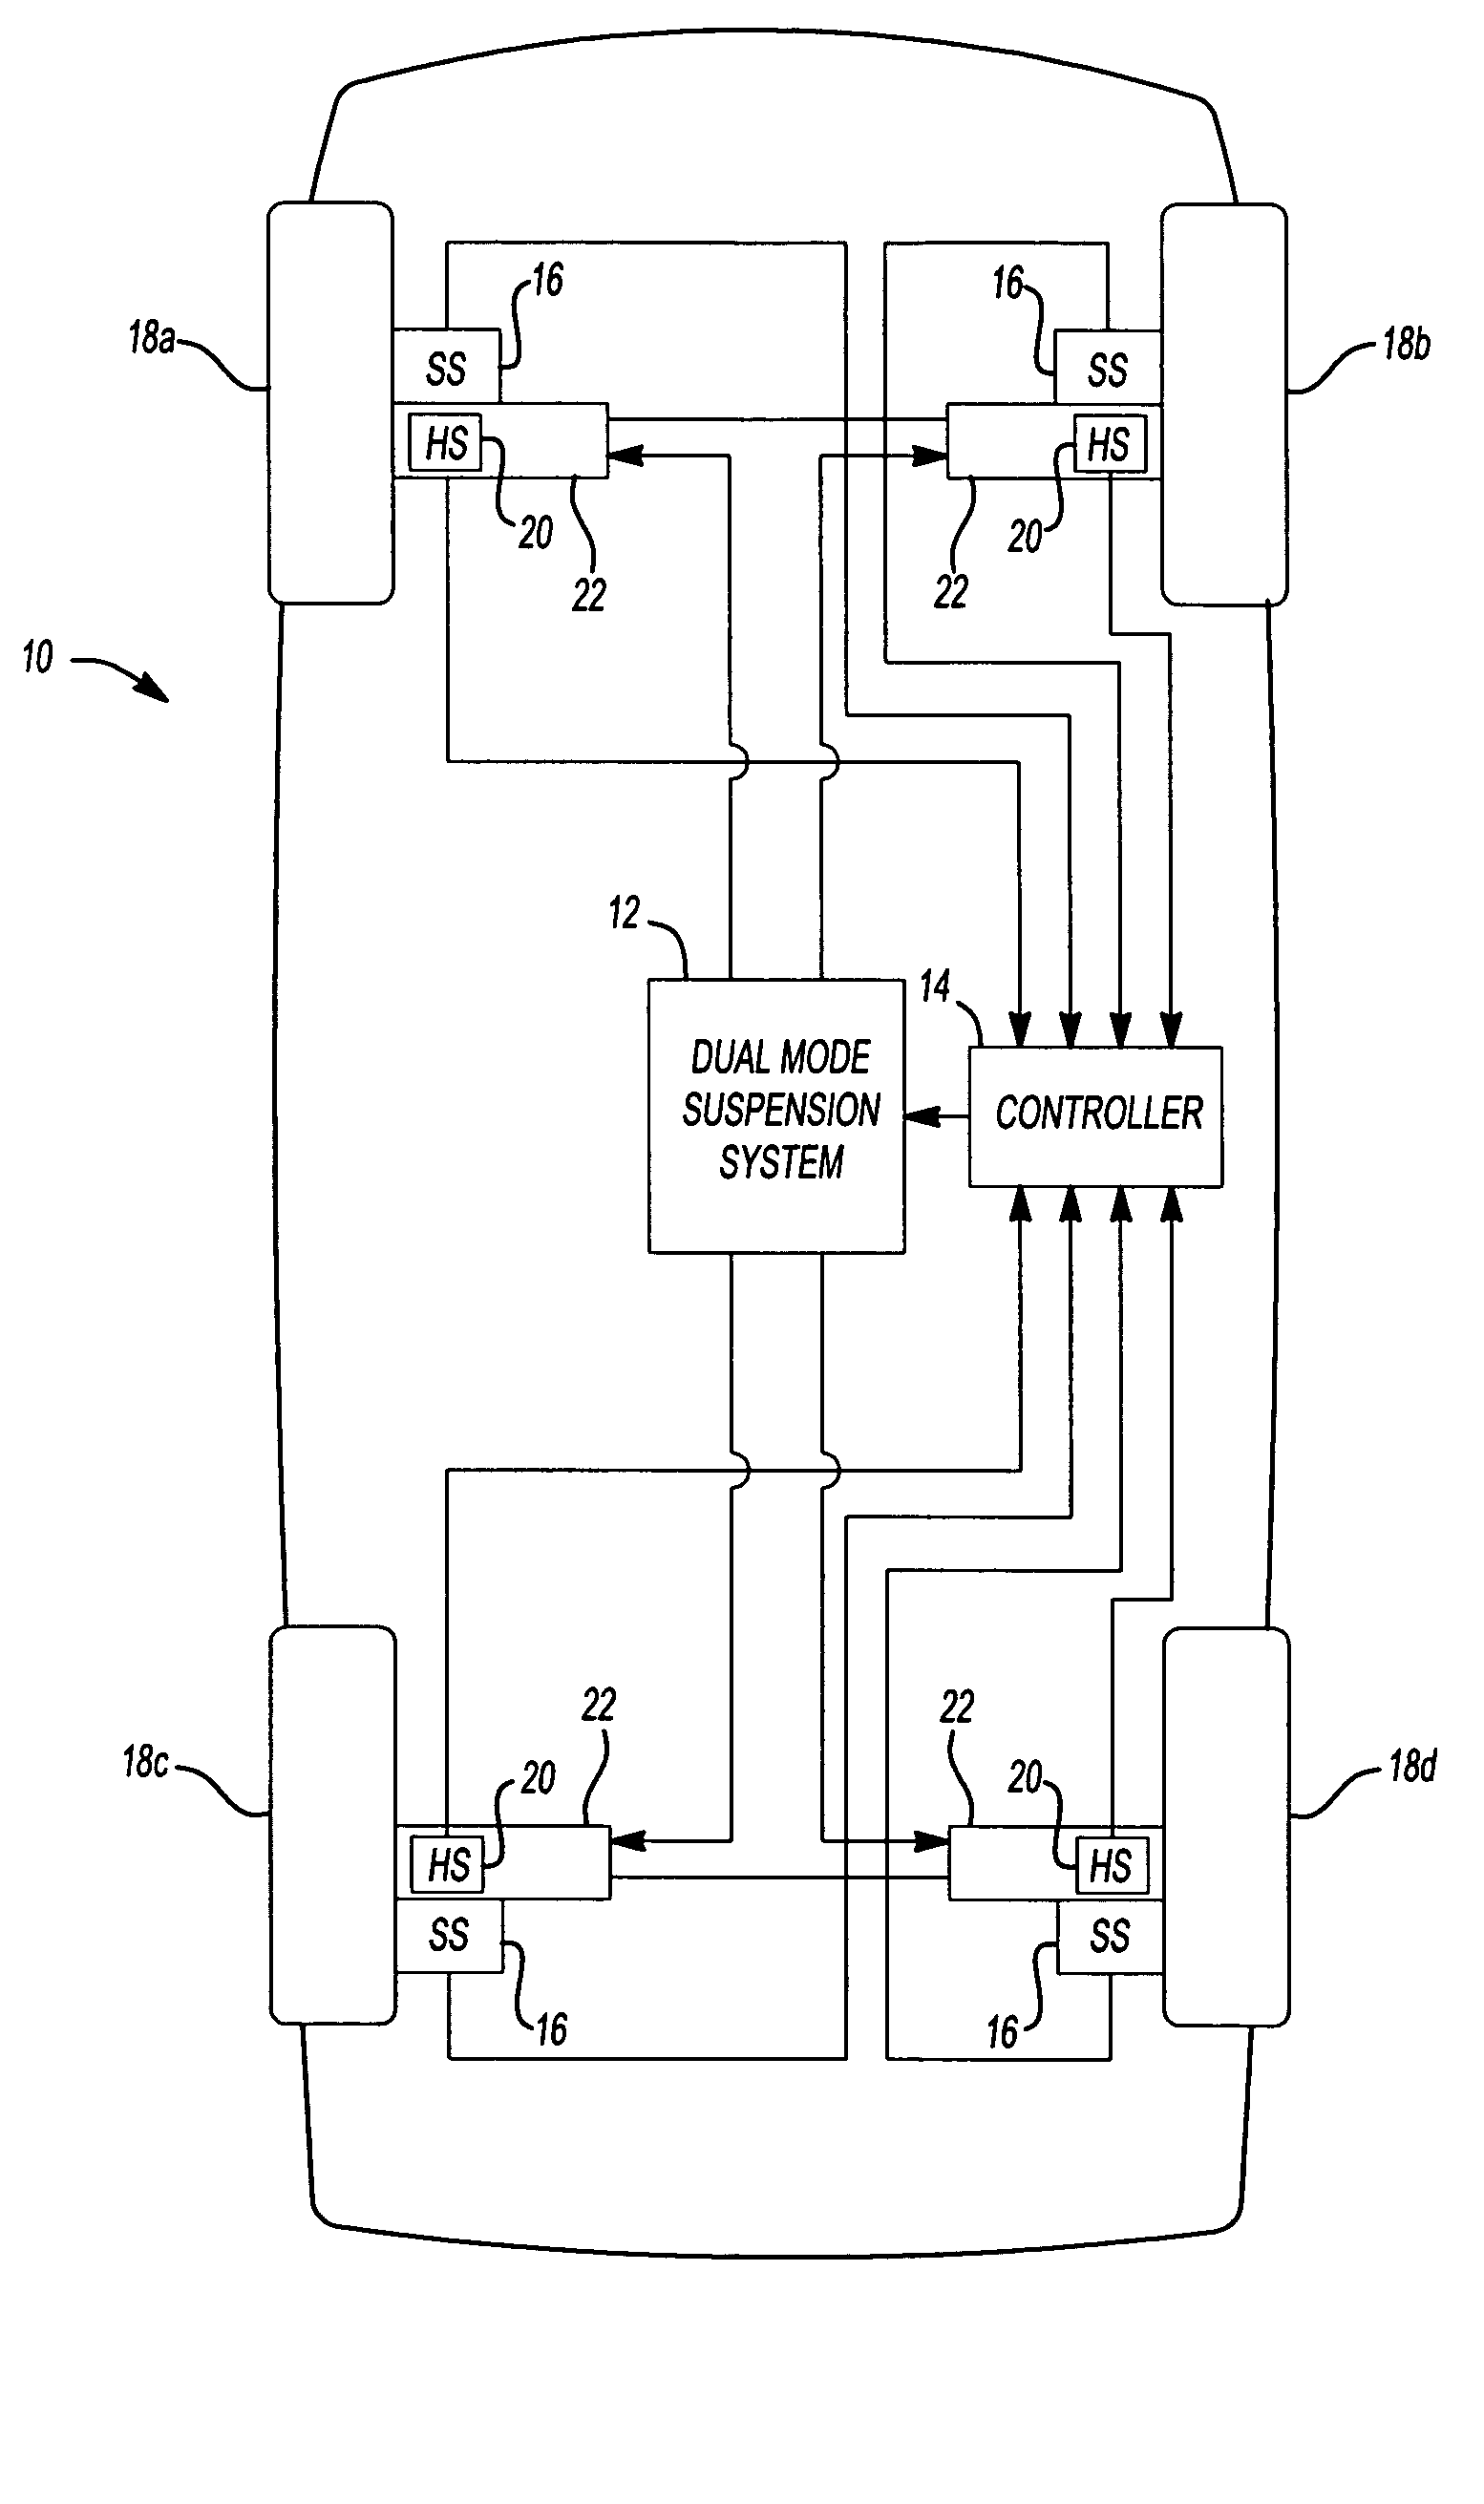 Method and system for controlling a dual mode vehicle suspension system